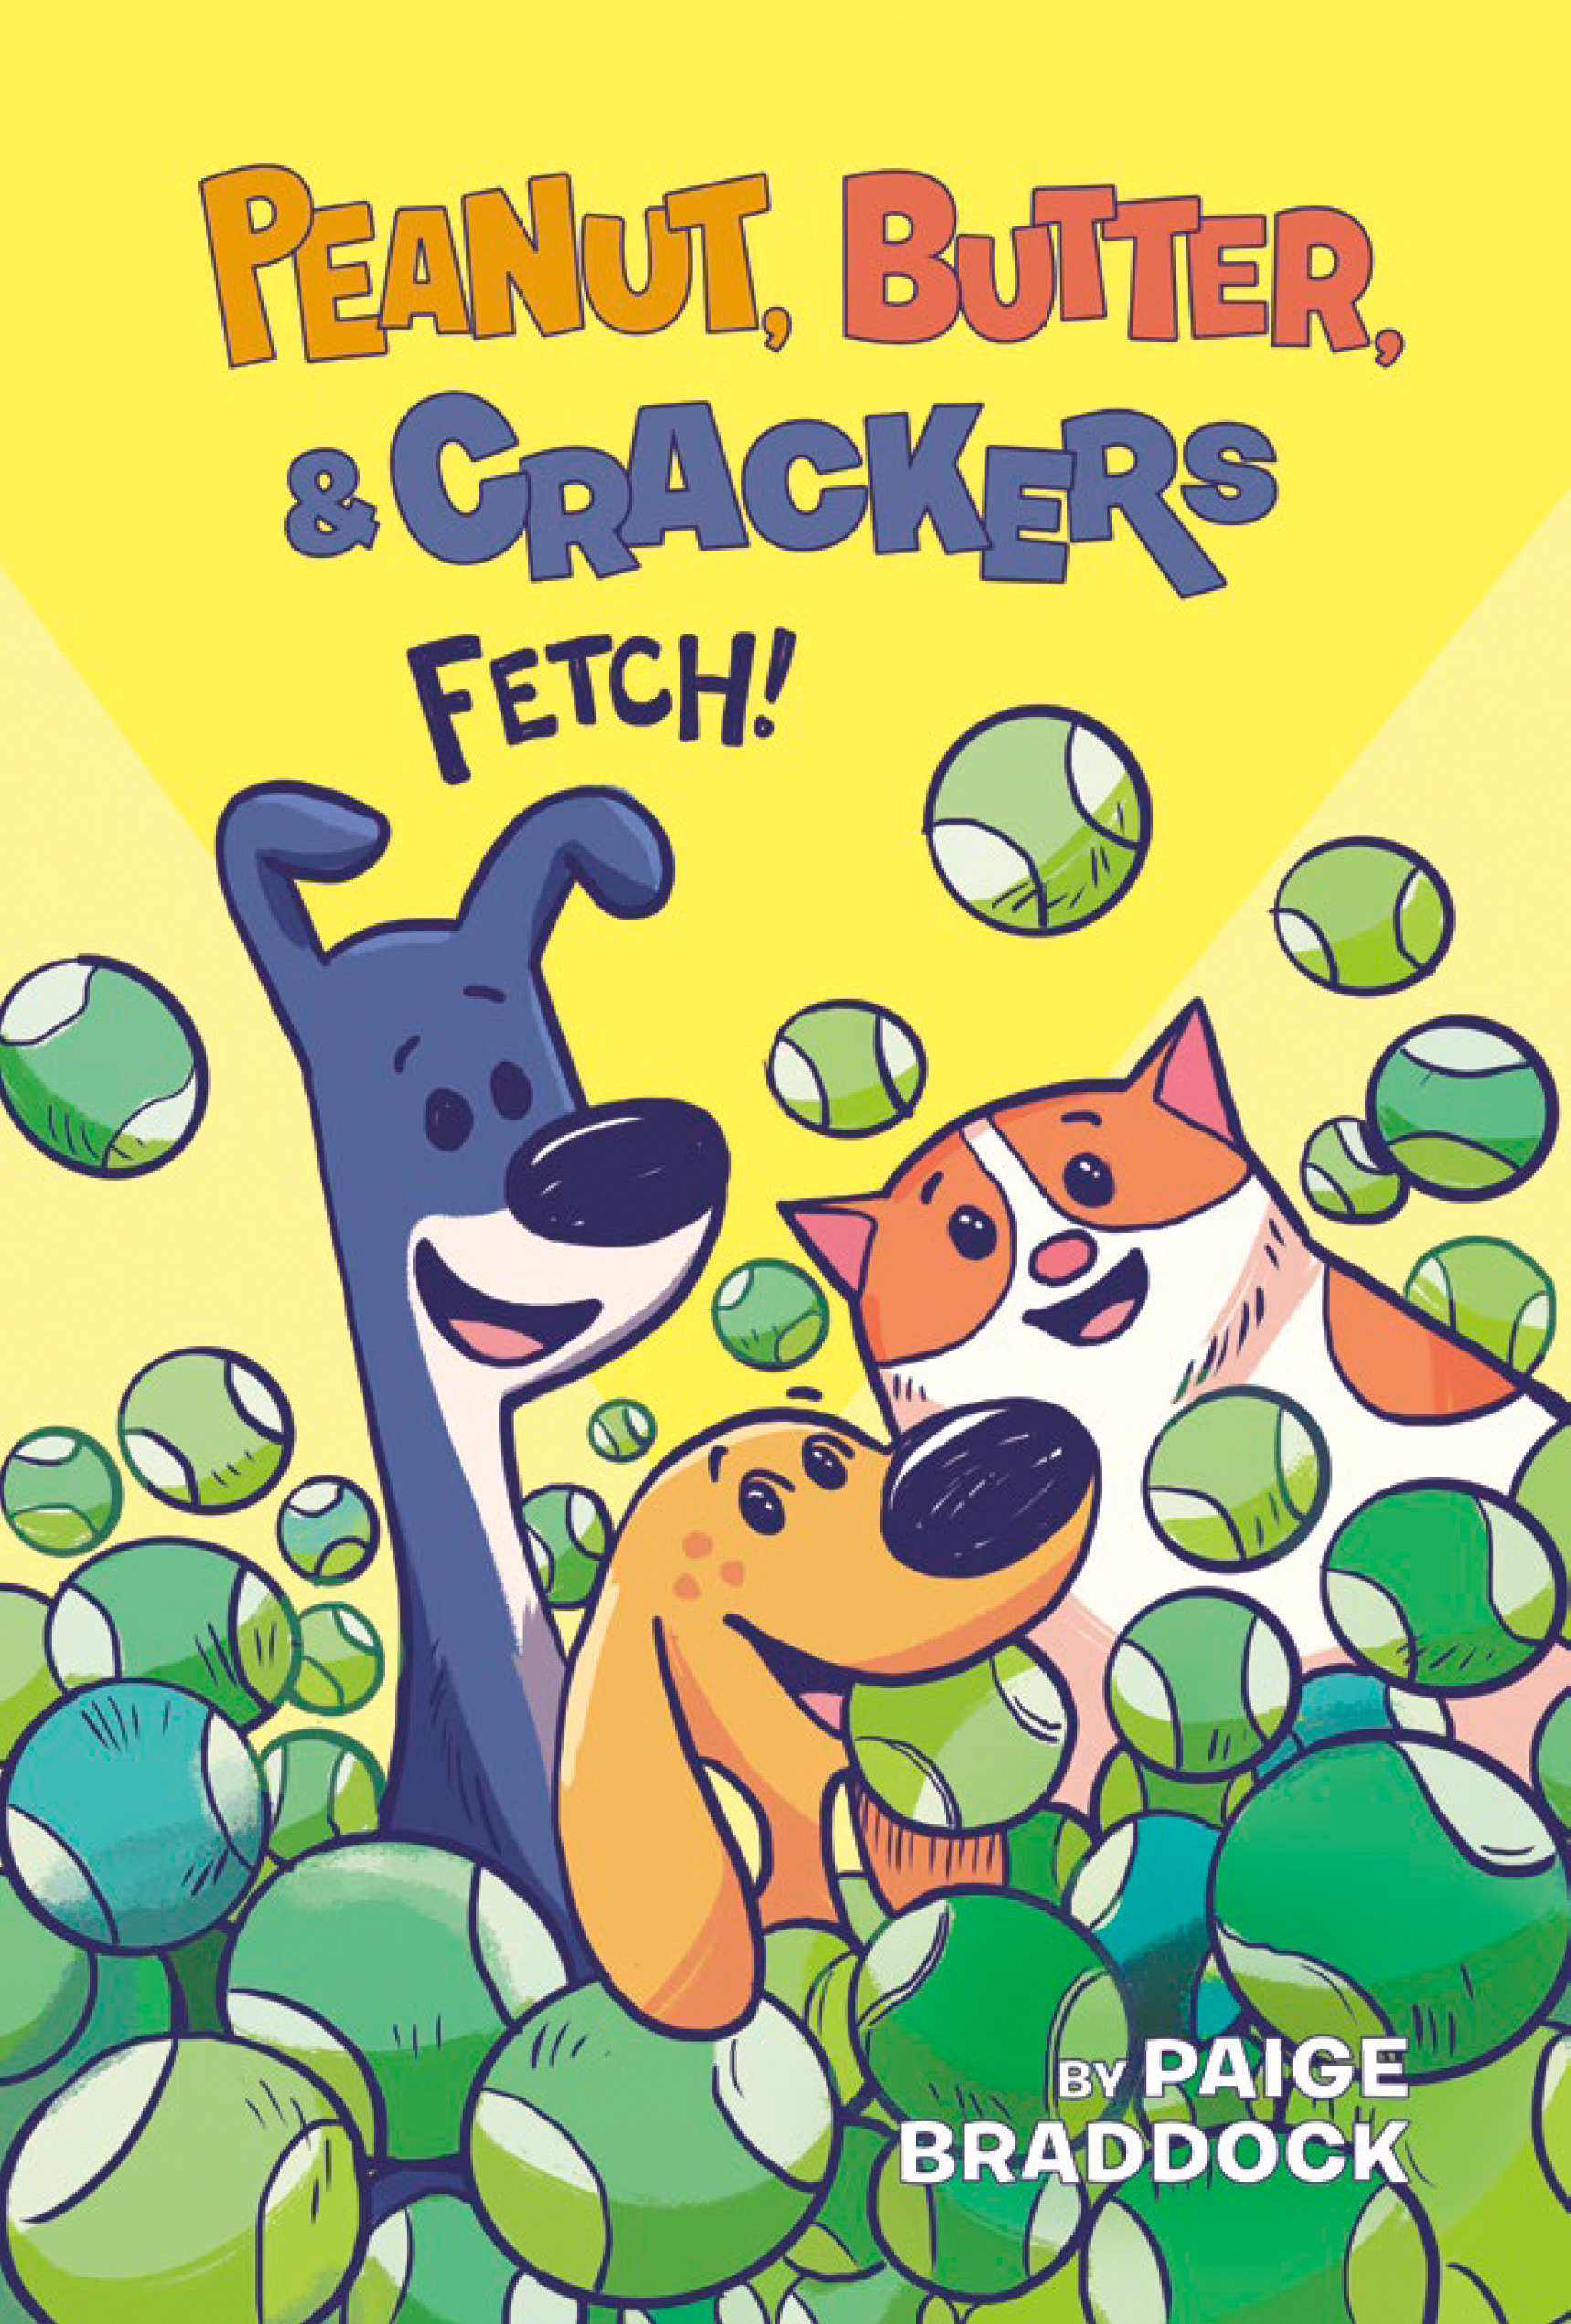 Peanut, Butter and Crackers - Fetch! | Braddock, Paige